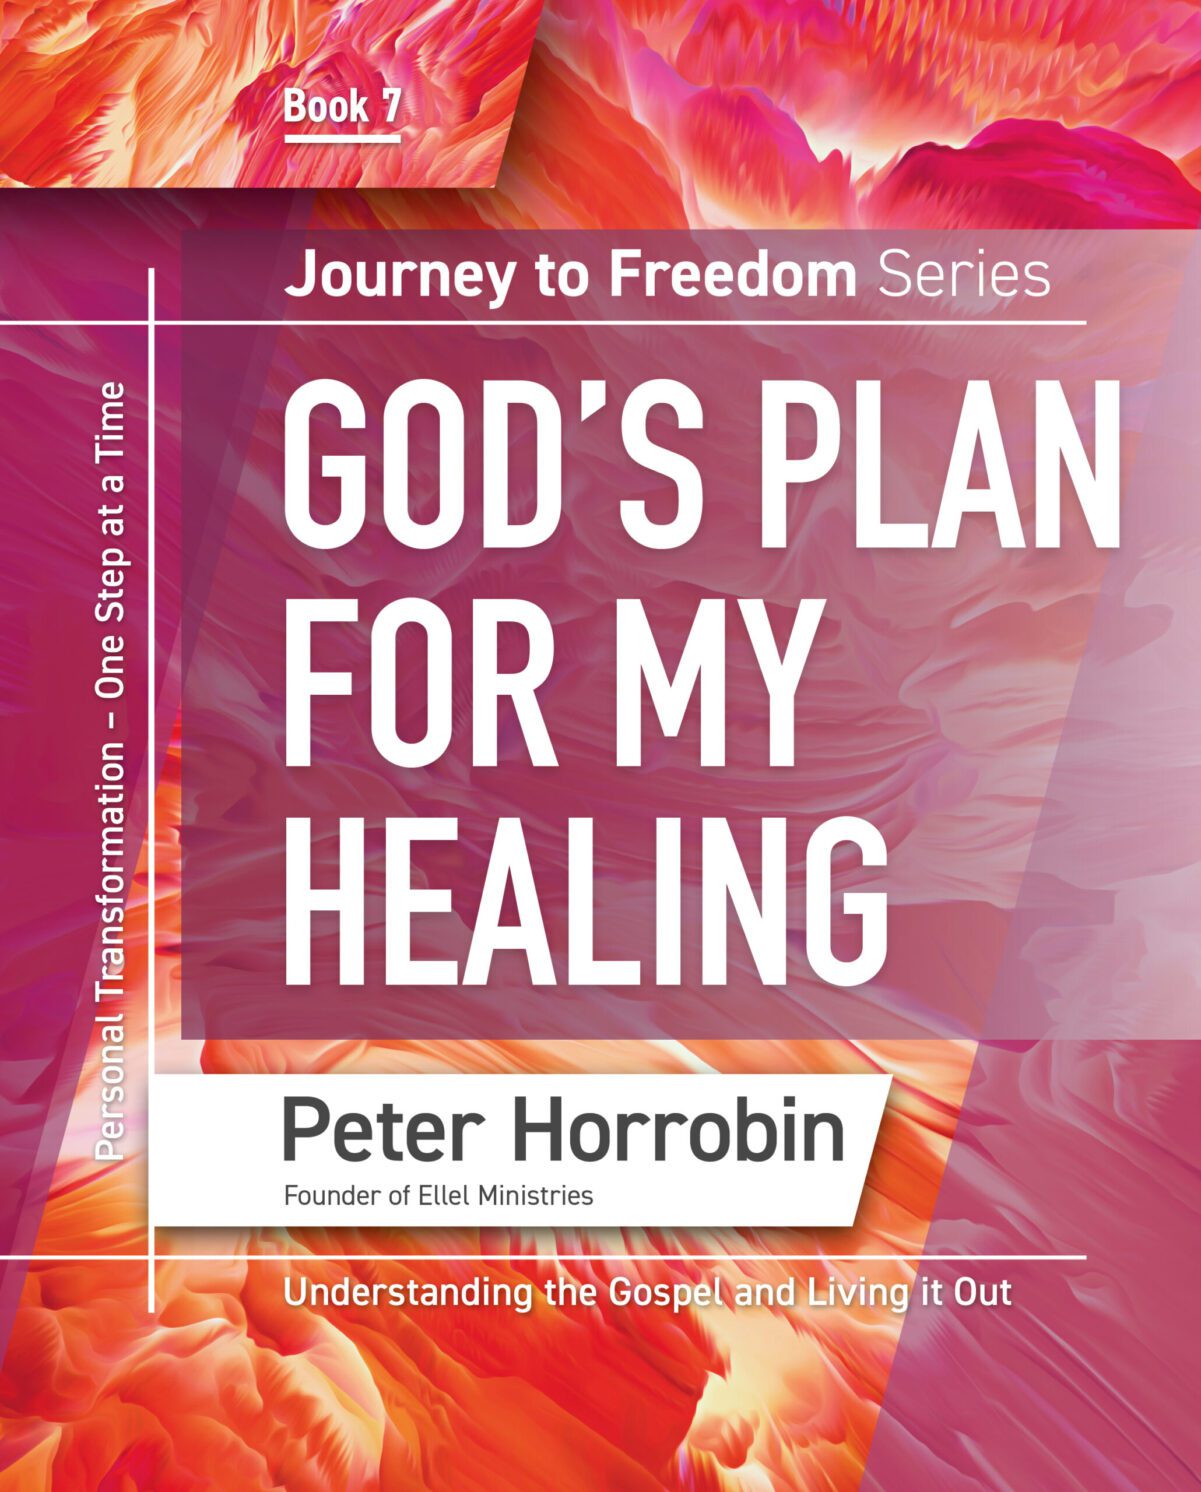 Journey to Freedom Book 7 – God’s Plan for My Healing